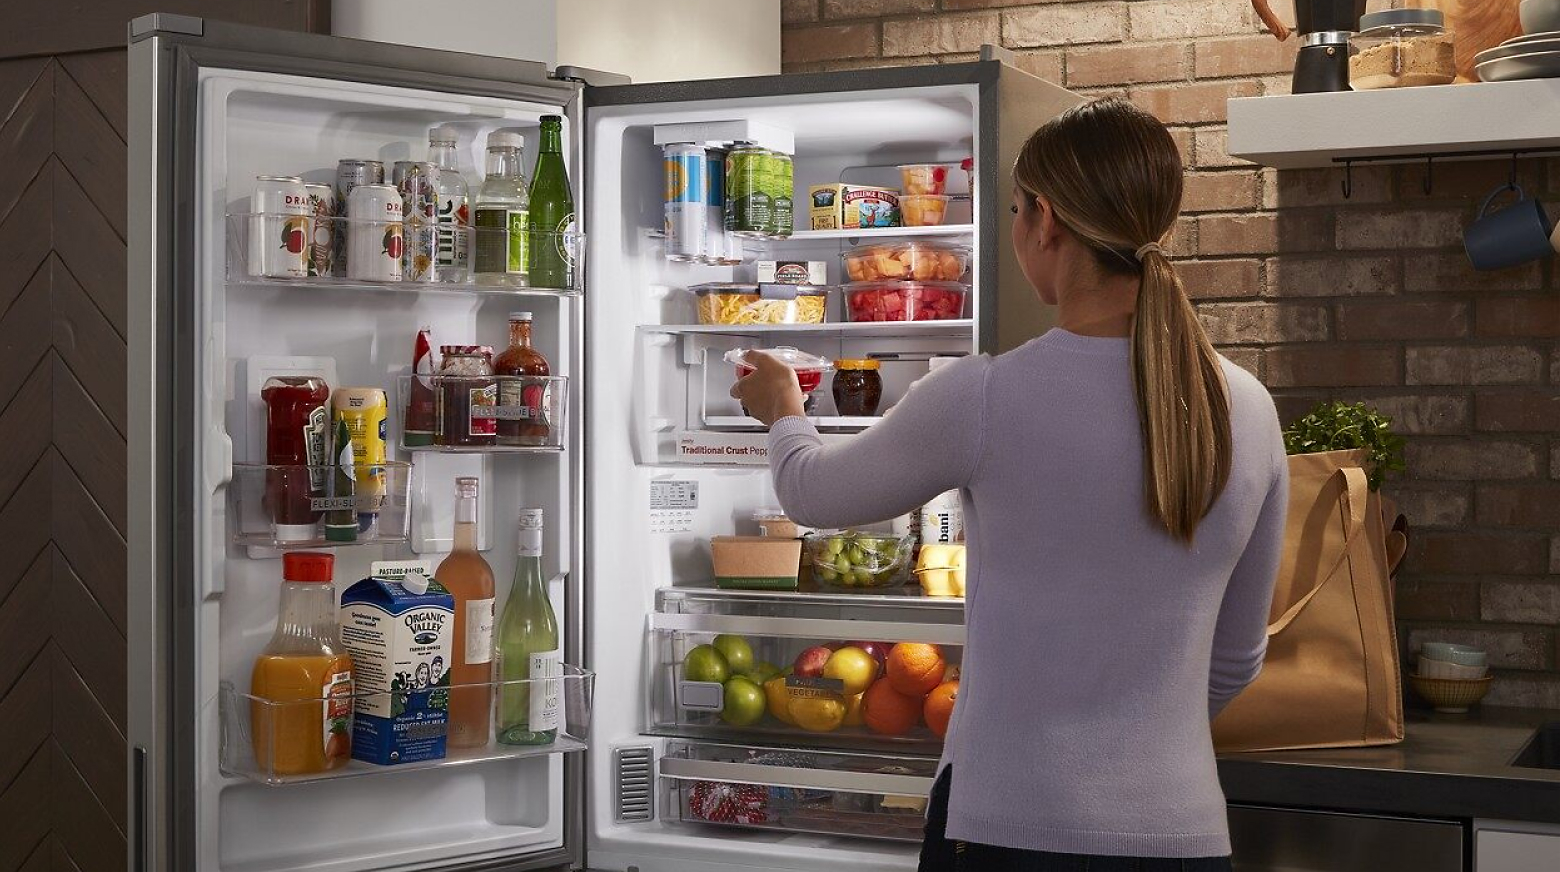 https://kitchenaid-h.assetsadobe.com/is/image/content/dam/business-unit/whirlpoolv2/en-us/marketing-content/site-assets/page-content/oc-articles/guide-to-refrigerator-sizes-dimensions/guide-to-refrigerator-sizes-dimensions_IMG1.jpg?fmt=png-alpha&qlt=85,0&resMode=sharp2&op_usm=1.75,0.3,2,0&scl=1&constrain=fit,1